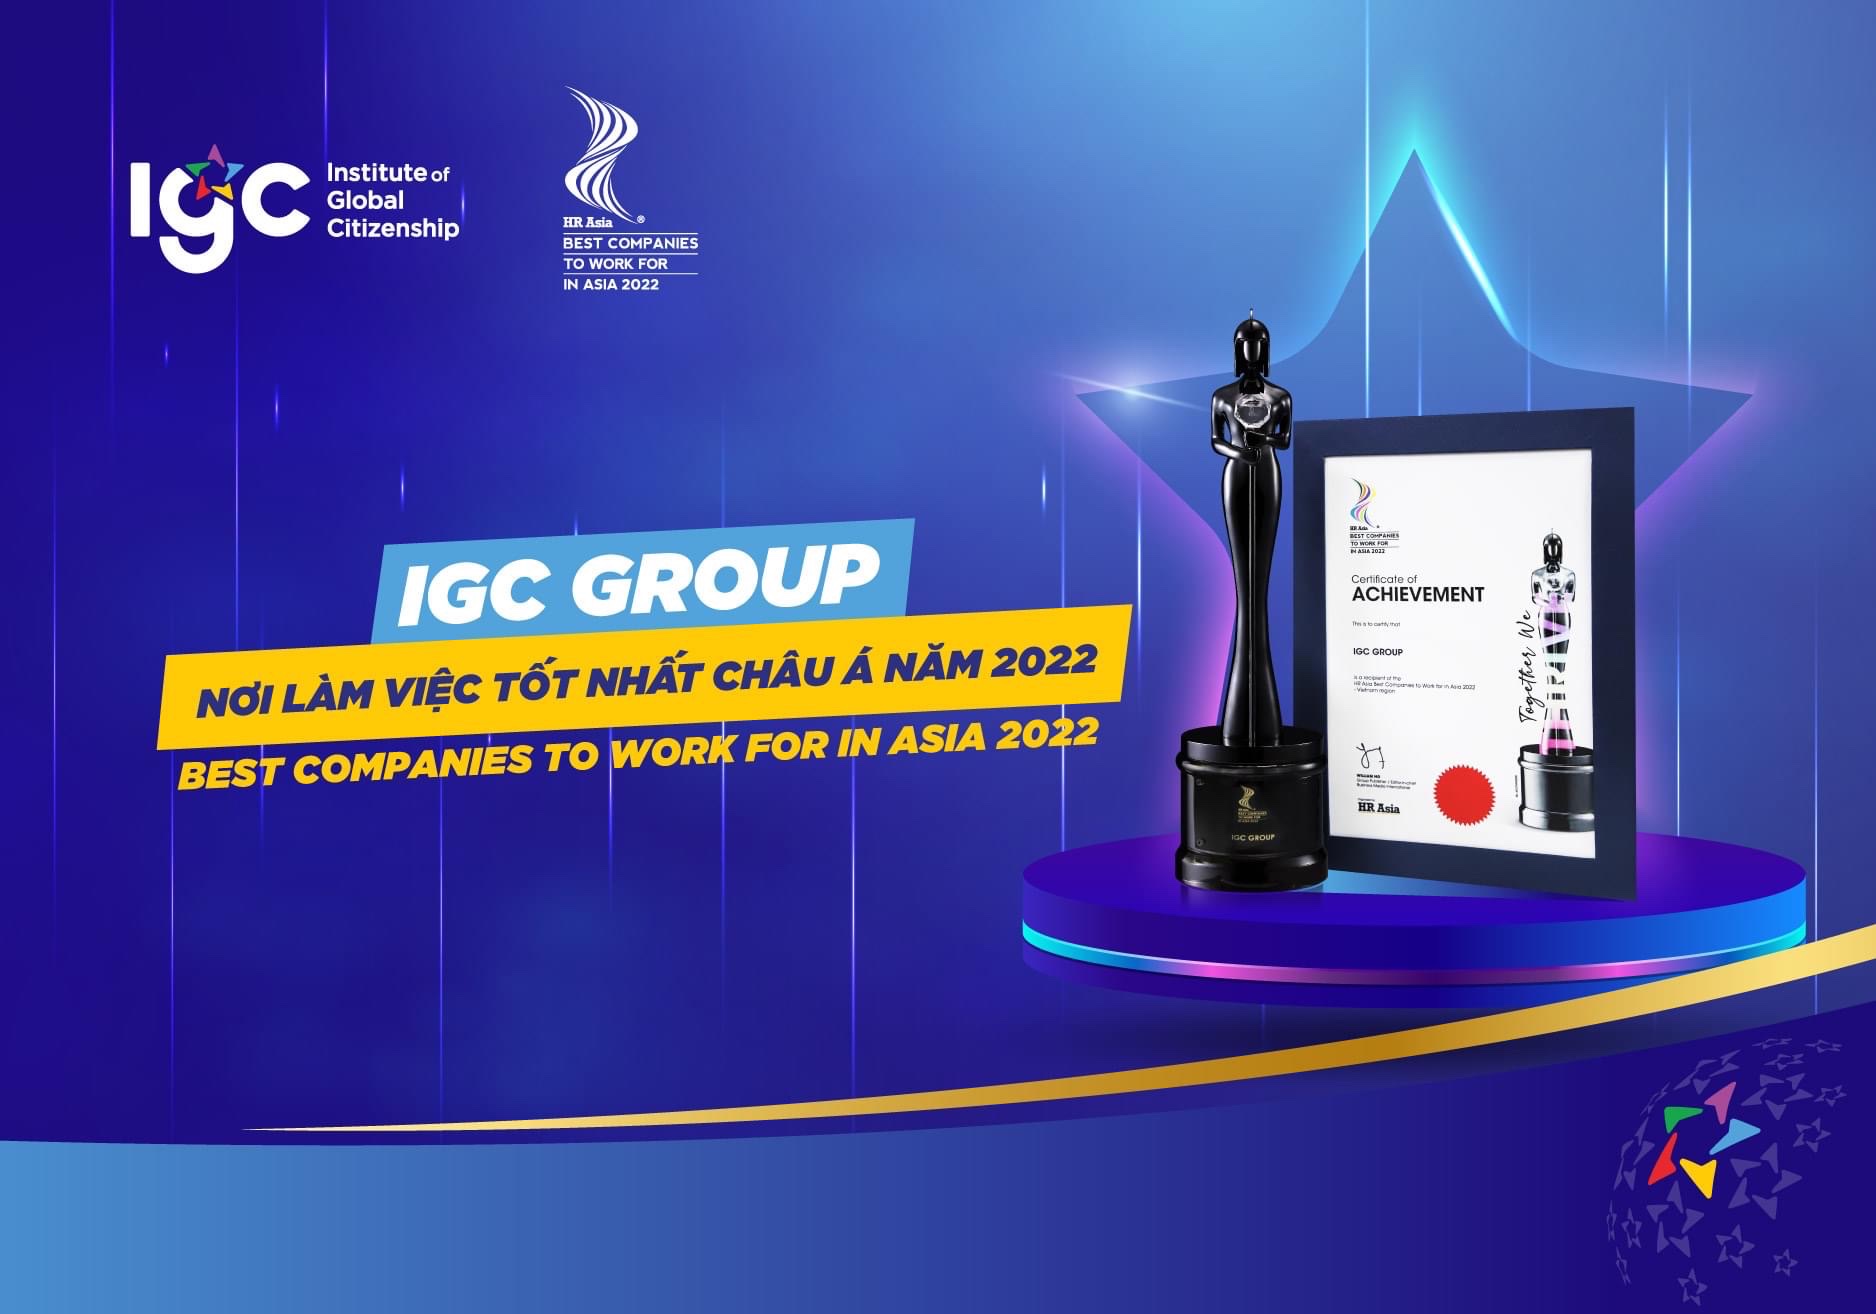 IGC was honored as "Best Companies to Work for in Asia 2022"